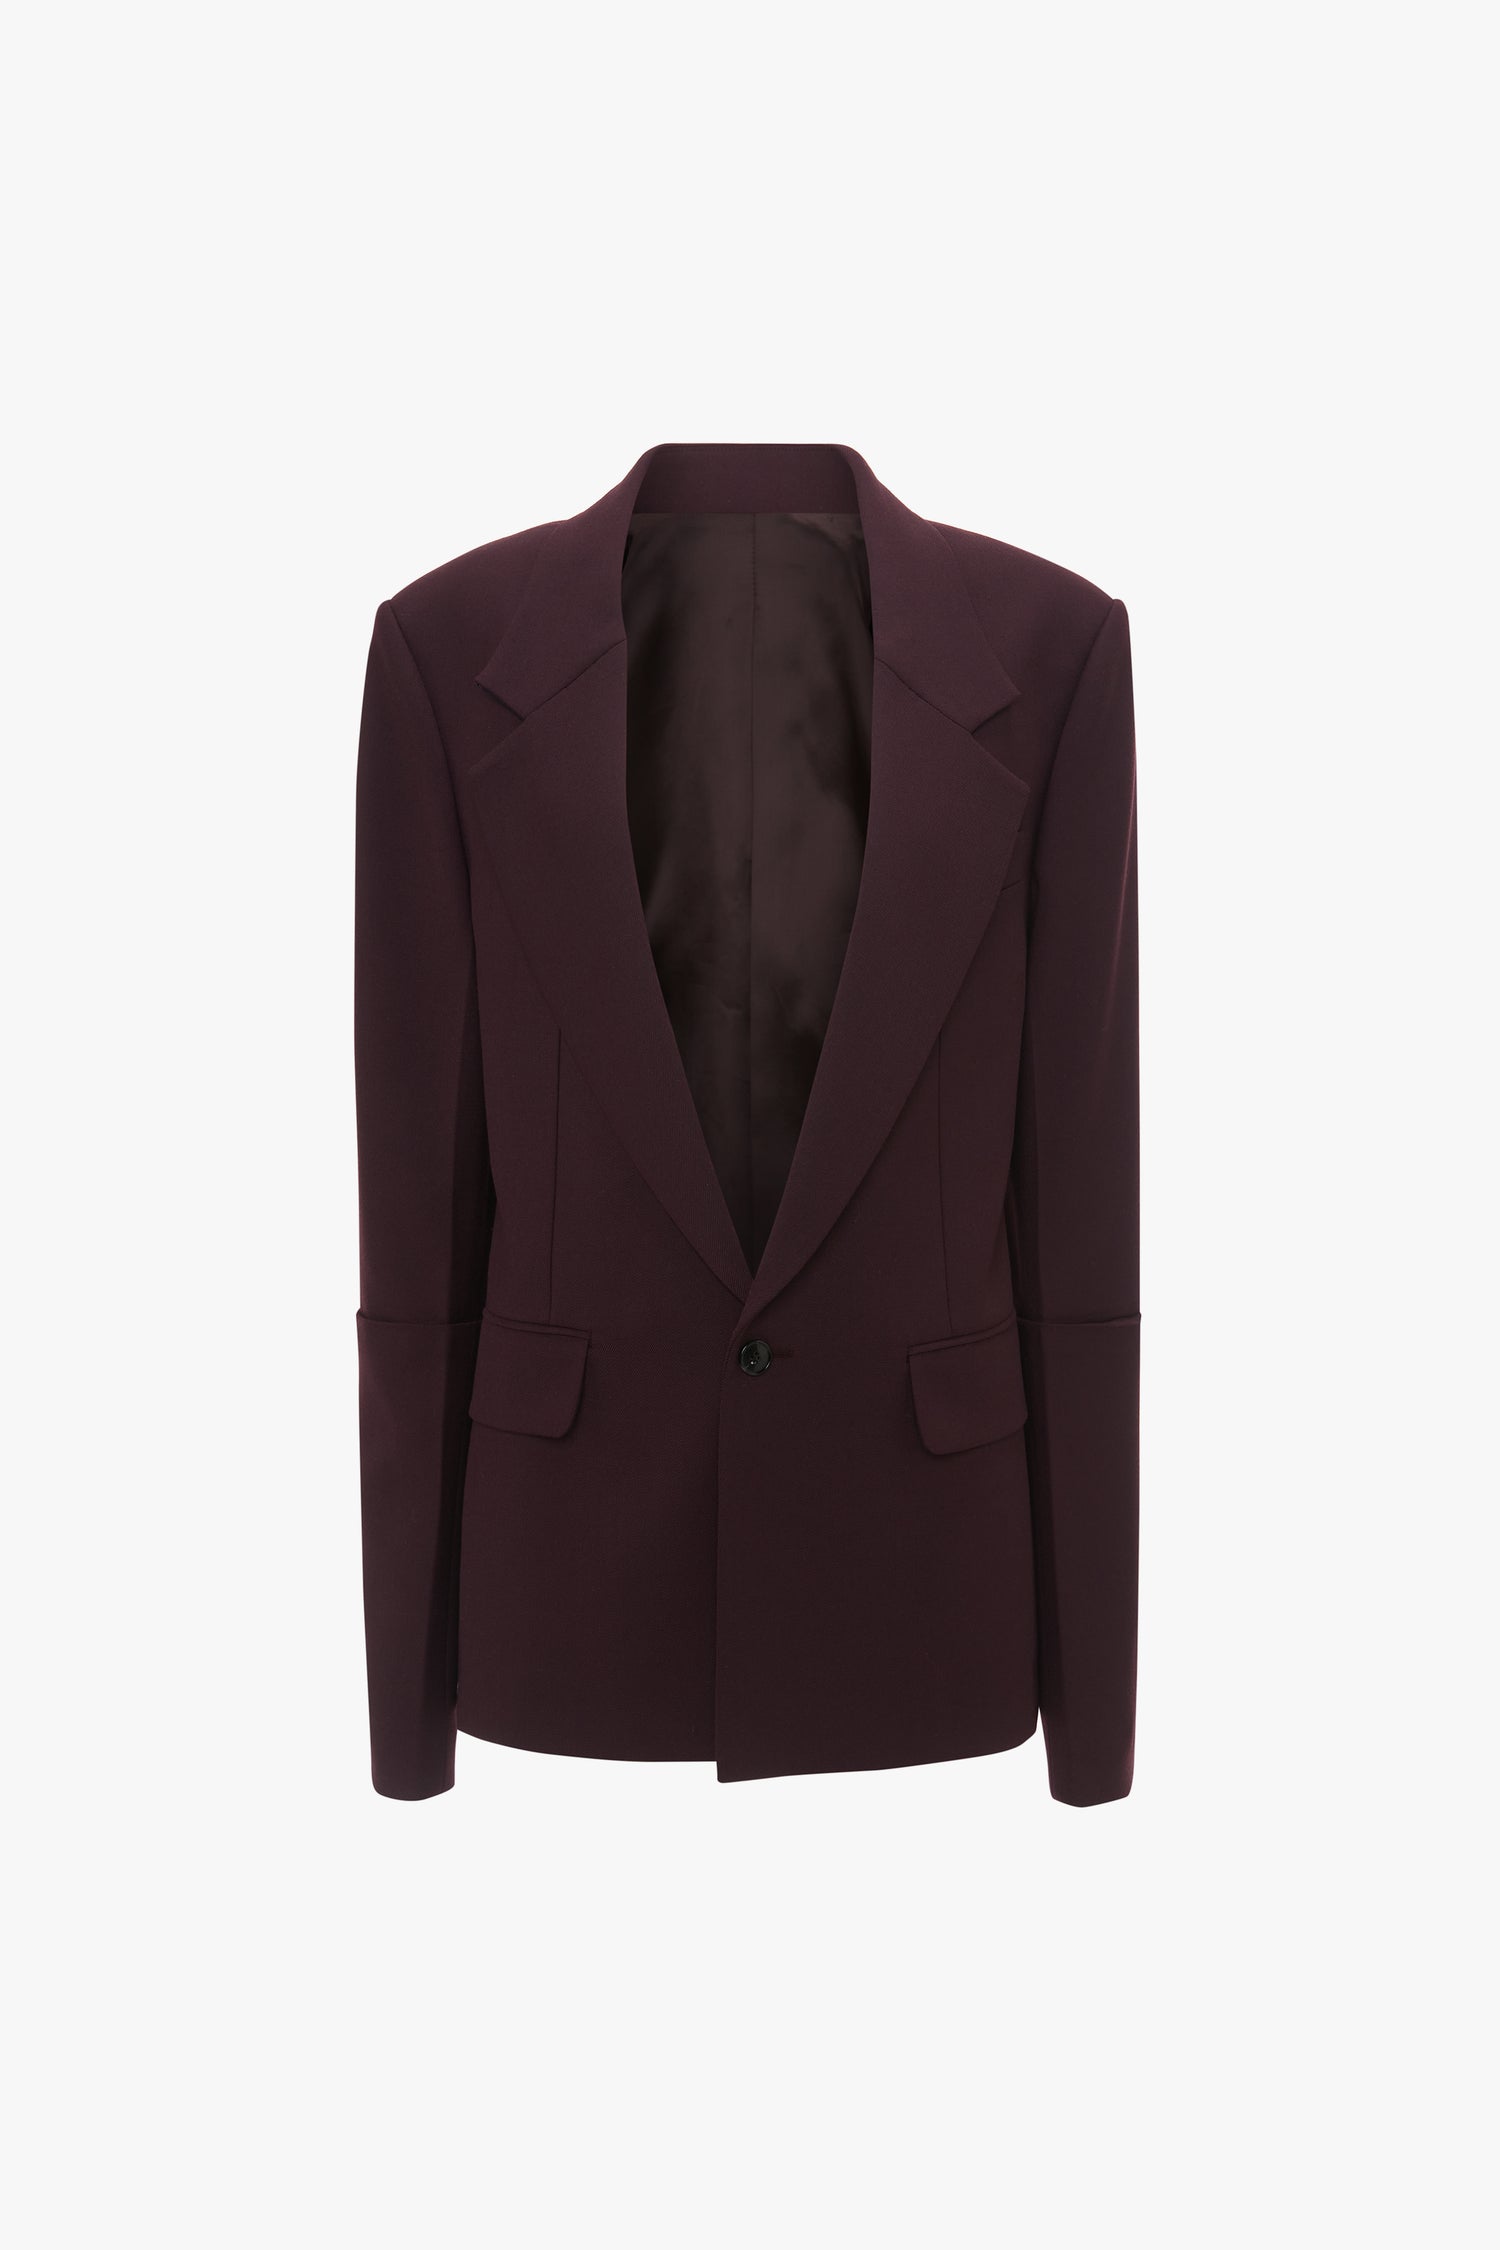 Victoria Beckham Sleeve Detail Patch Pocket Jacket In Deep Mahogany with a single button closure, notched lapels, and two front pockets on a white background, crafted from recycled wool.